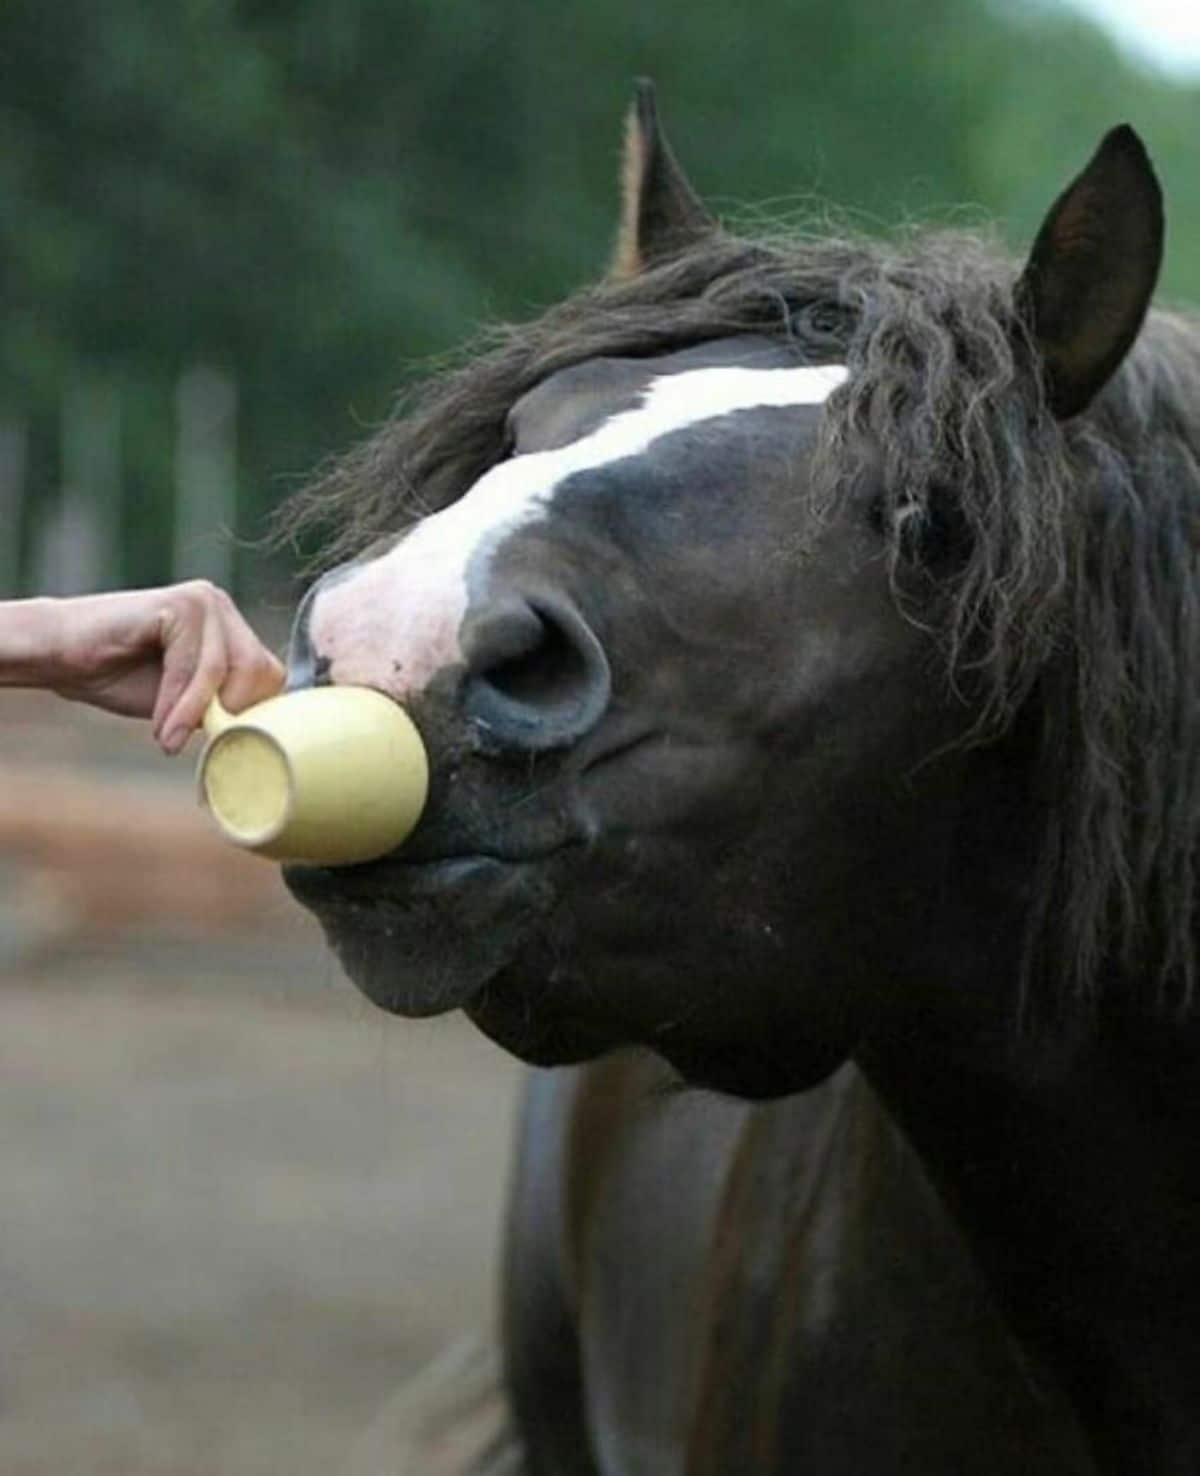 black and white horse drinking out of a yellow mug someone is holding to its mouth